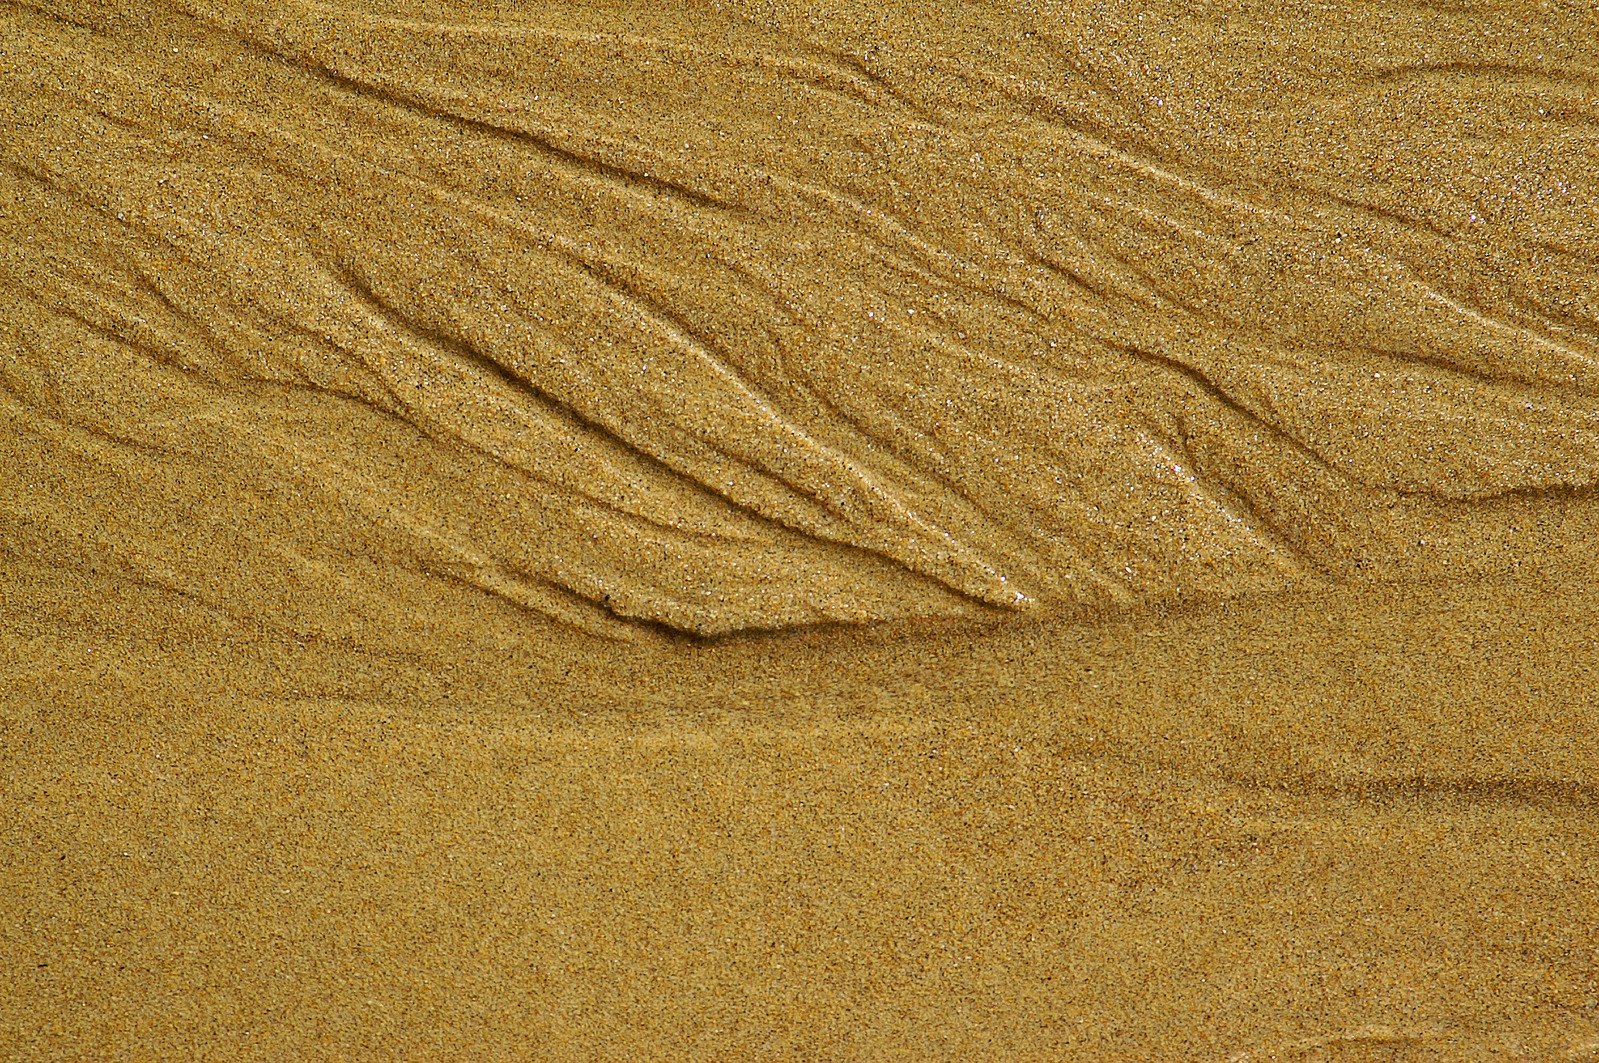 an image of the sand patterns made by water on the beach